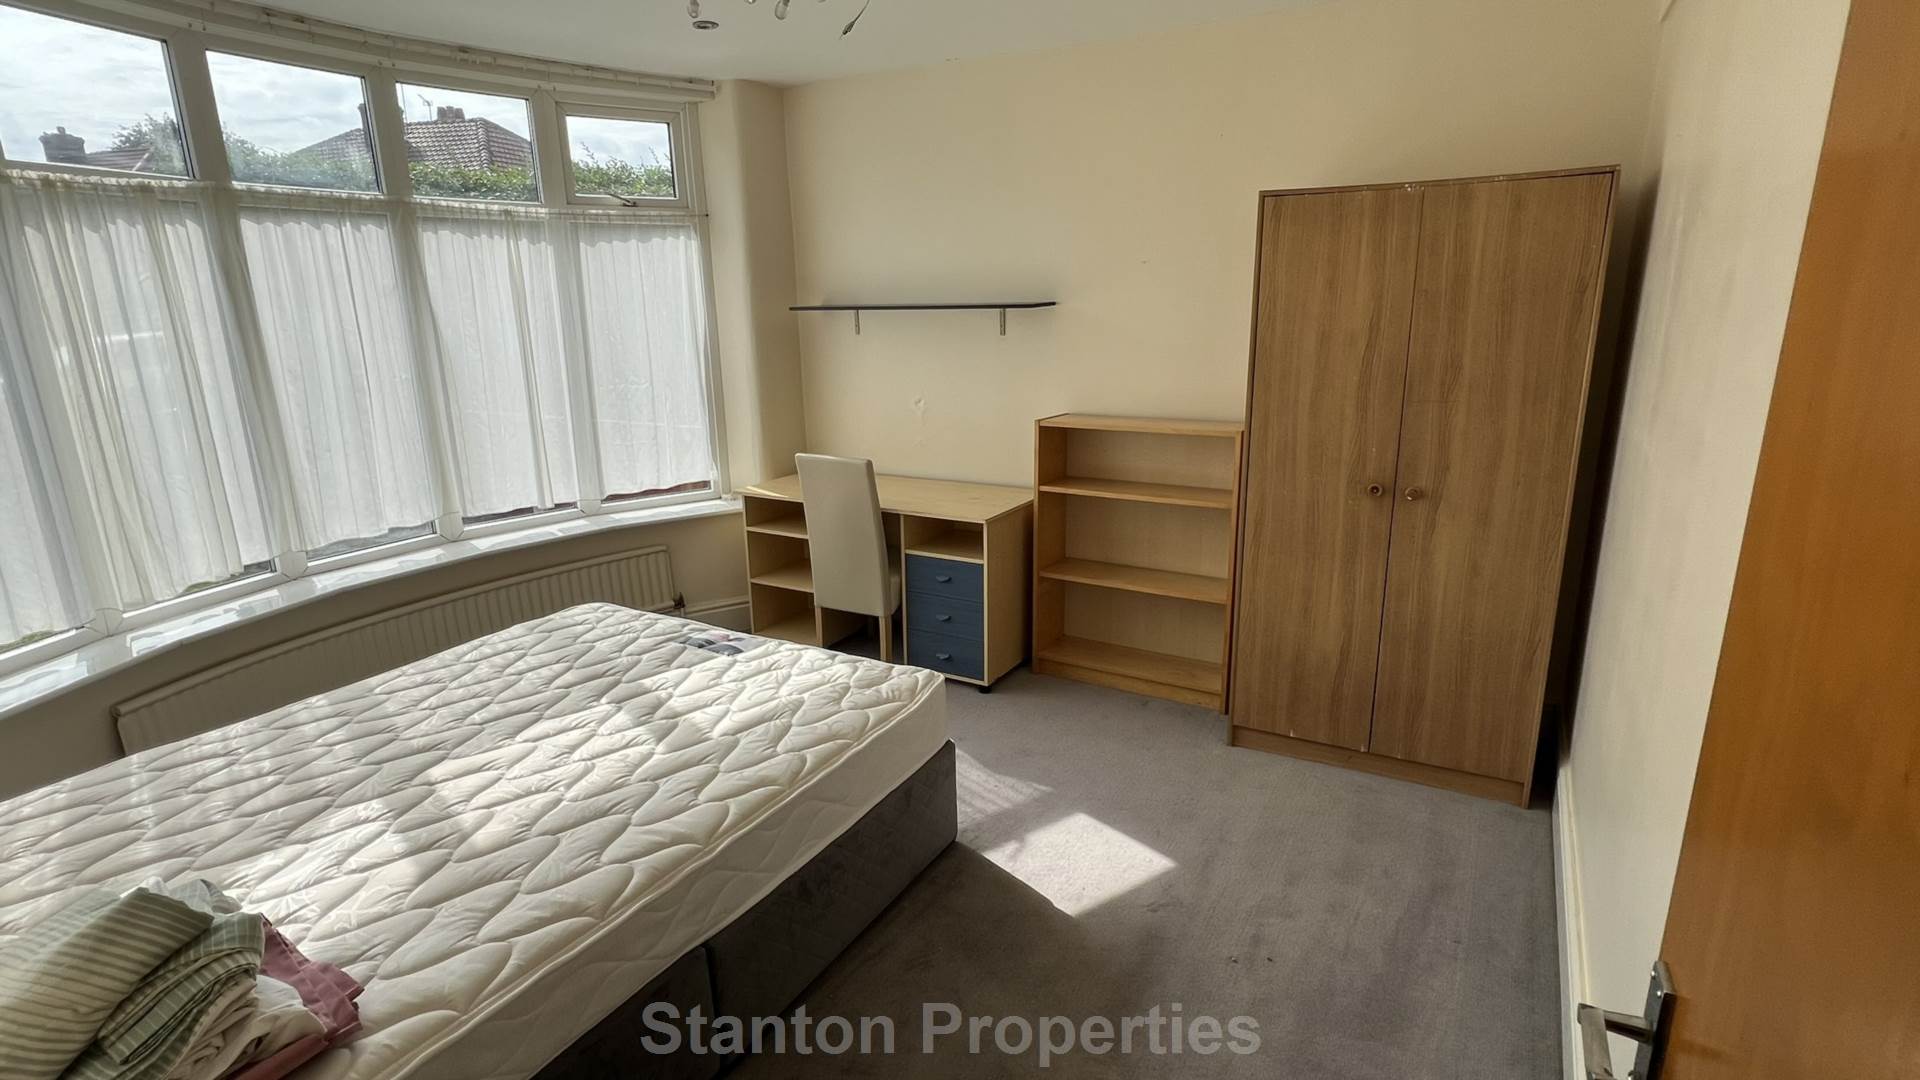 4 bed Semi-Detached House for rent in Gatley. From Stanton Properties